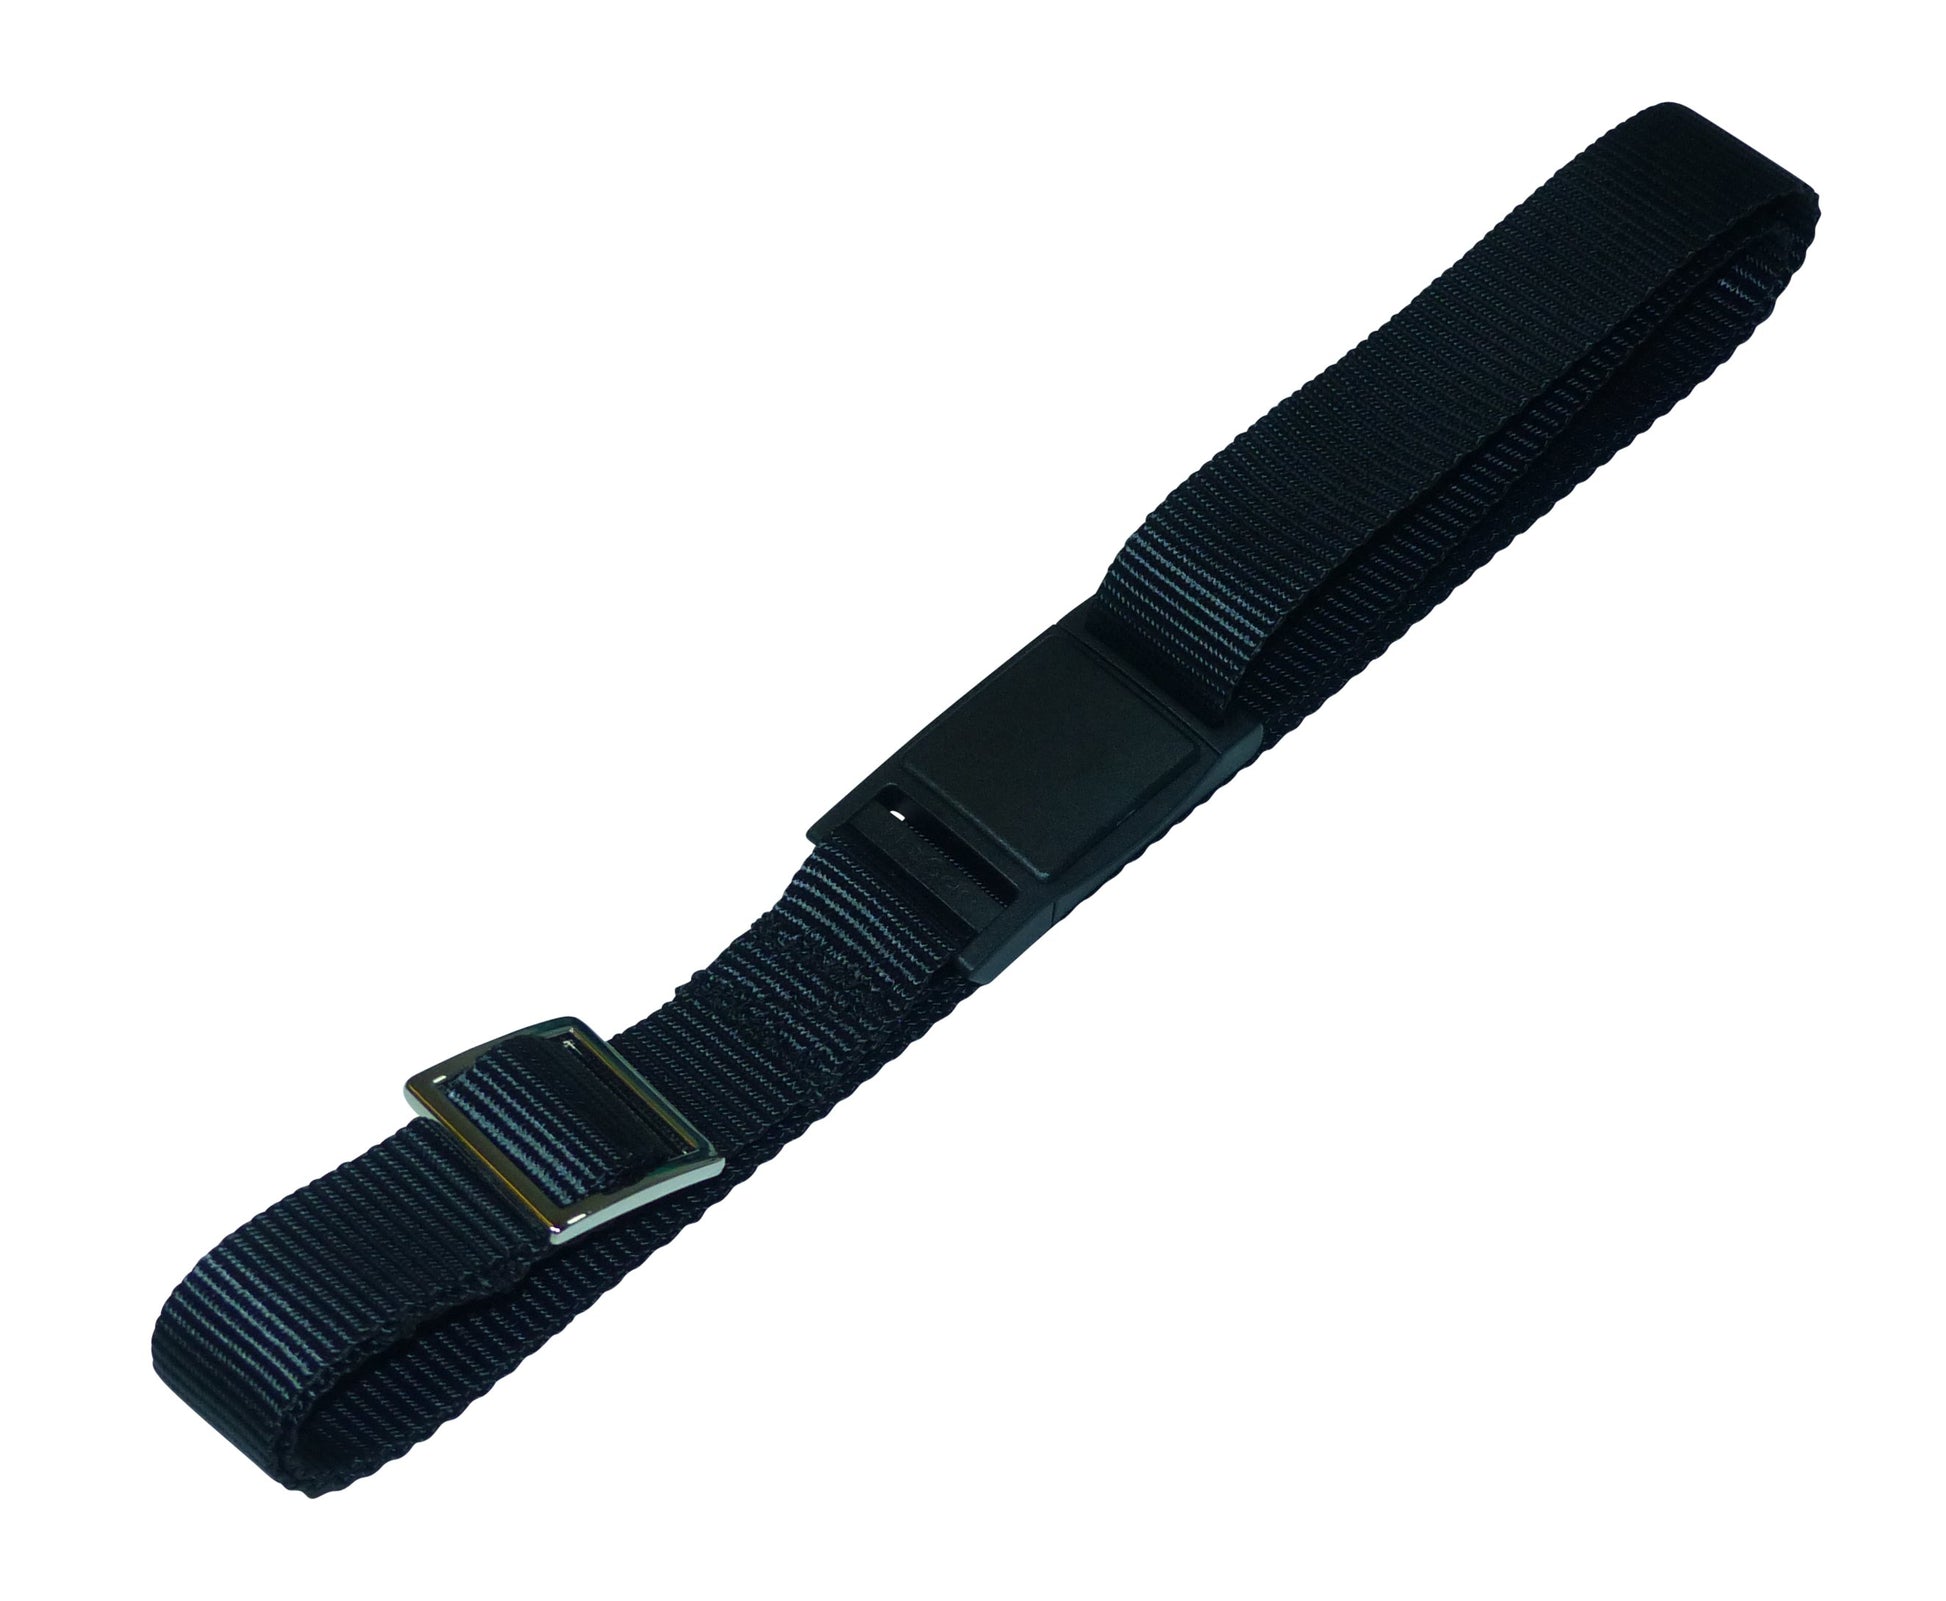 Benristraps 25mm Strap with Fidlock Quick Release & Length-Adjusting Buckles (Pair) in black